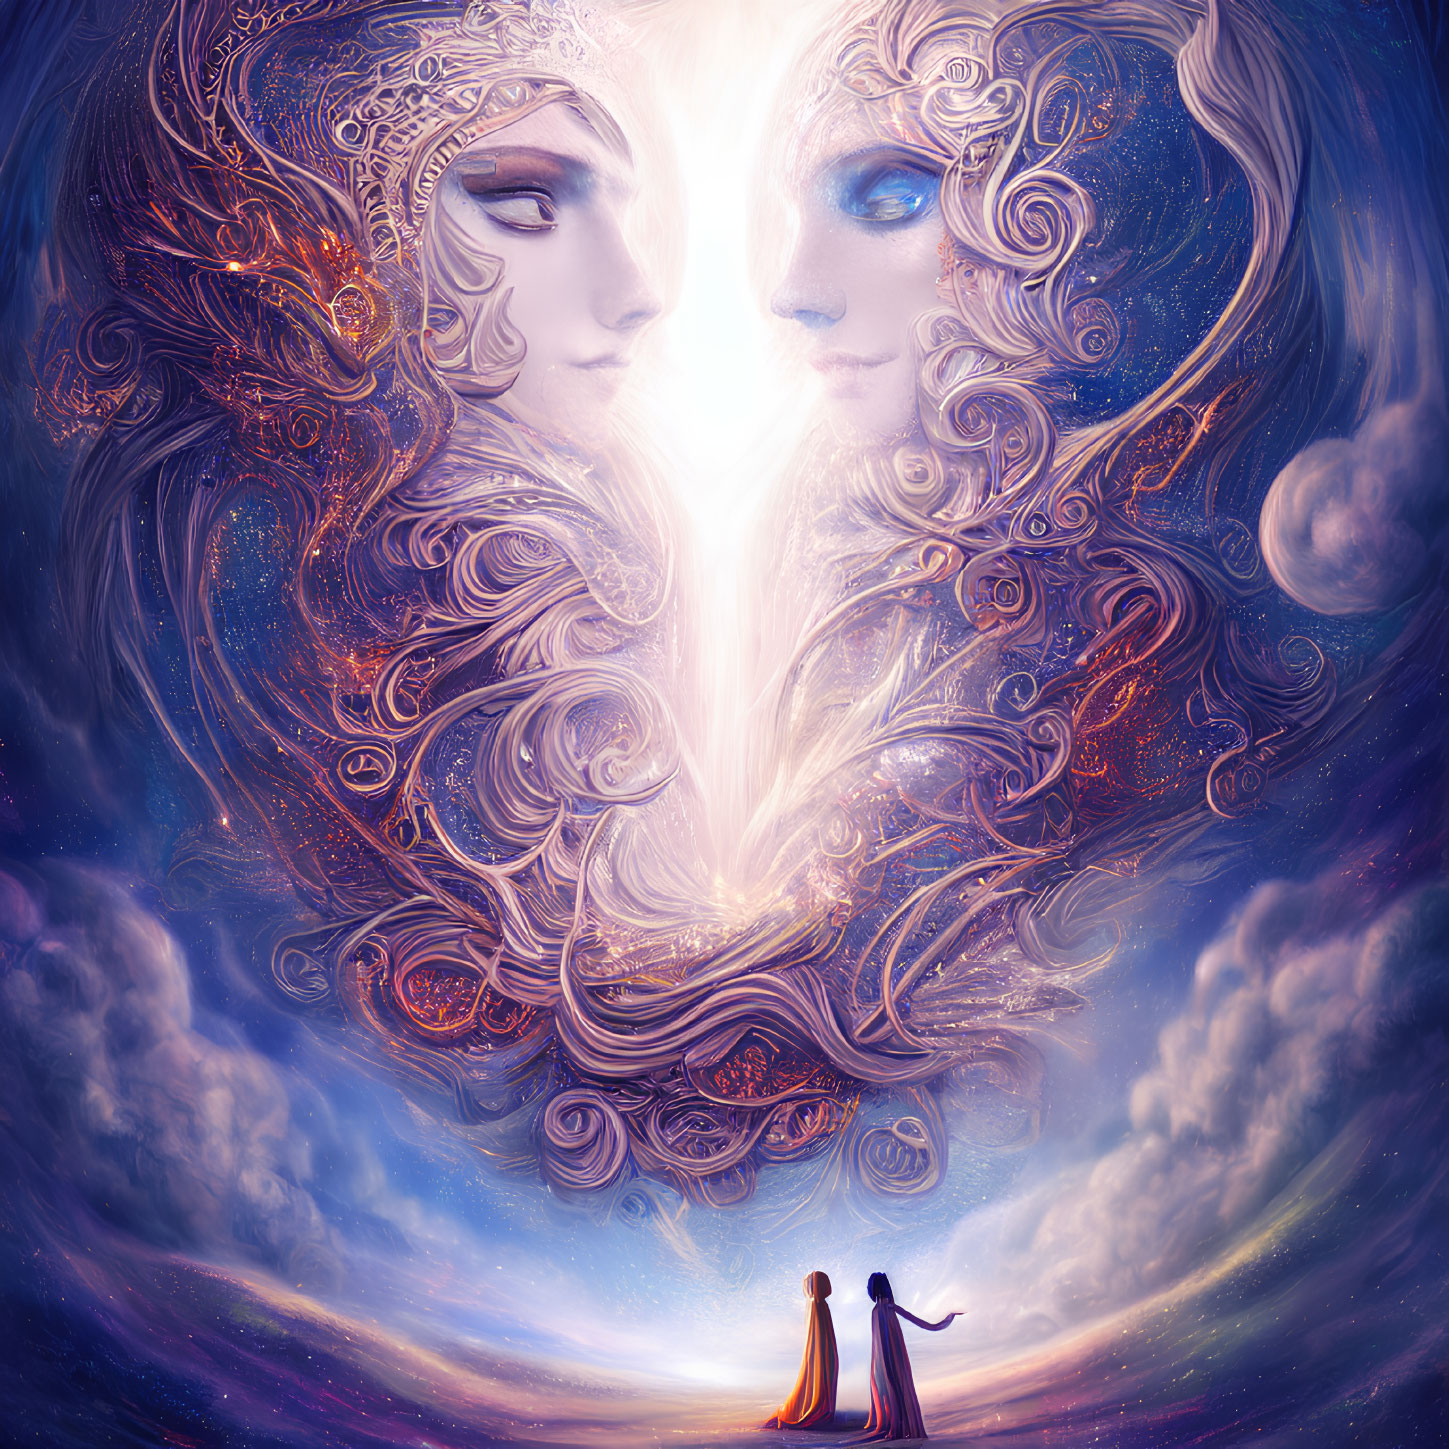 Ethereal figures under cosmic tapestry of intertwined faces